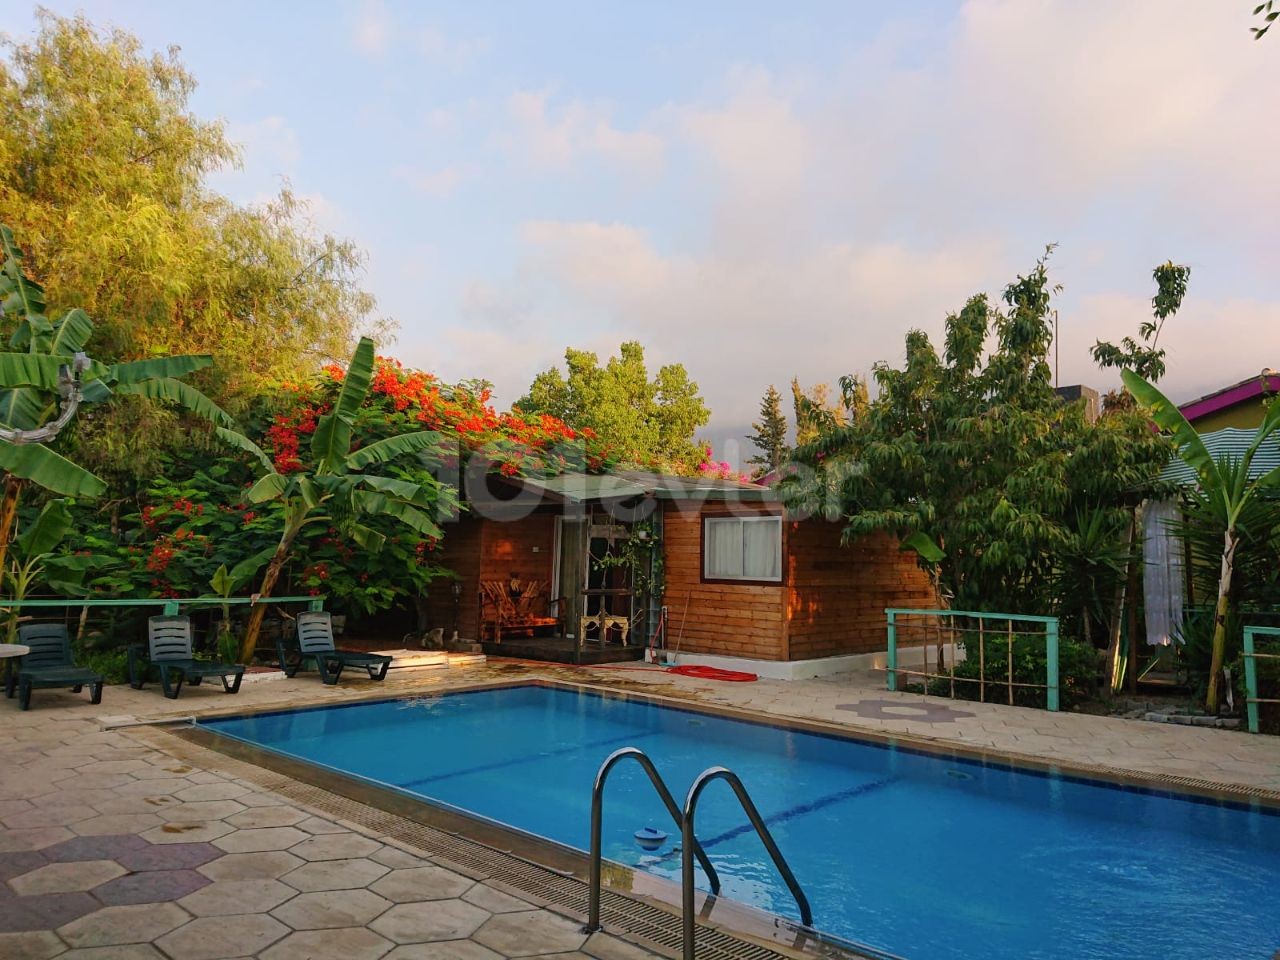 4+1 Stone Cypriot Gouse with saouna,2000m2 garden ,pool and guest detach house...Yeşiltepe area. NO tax require.